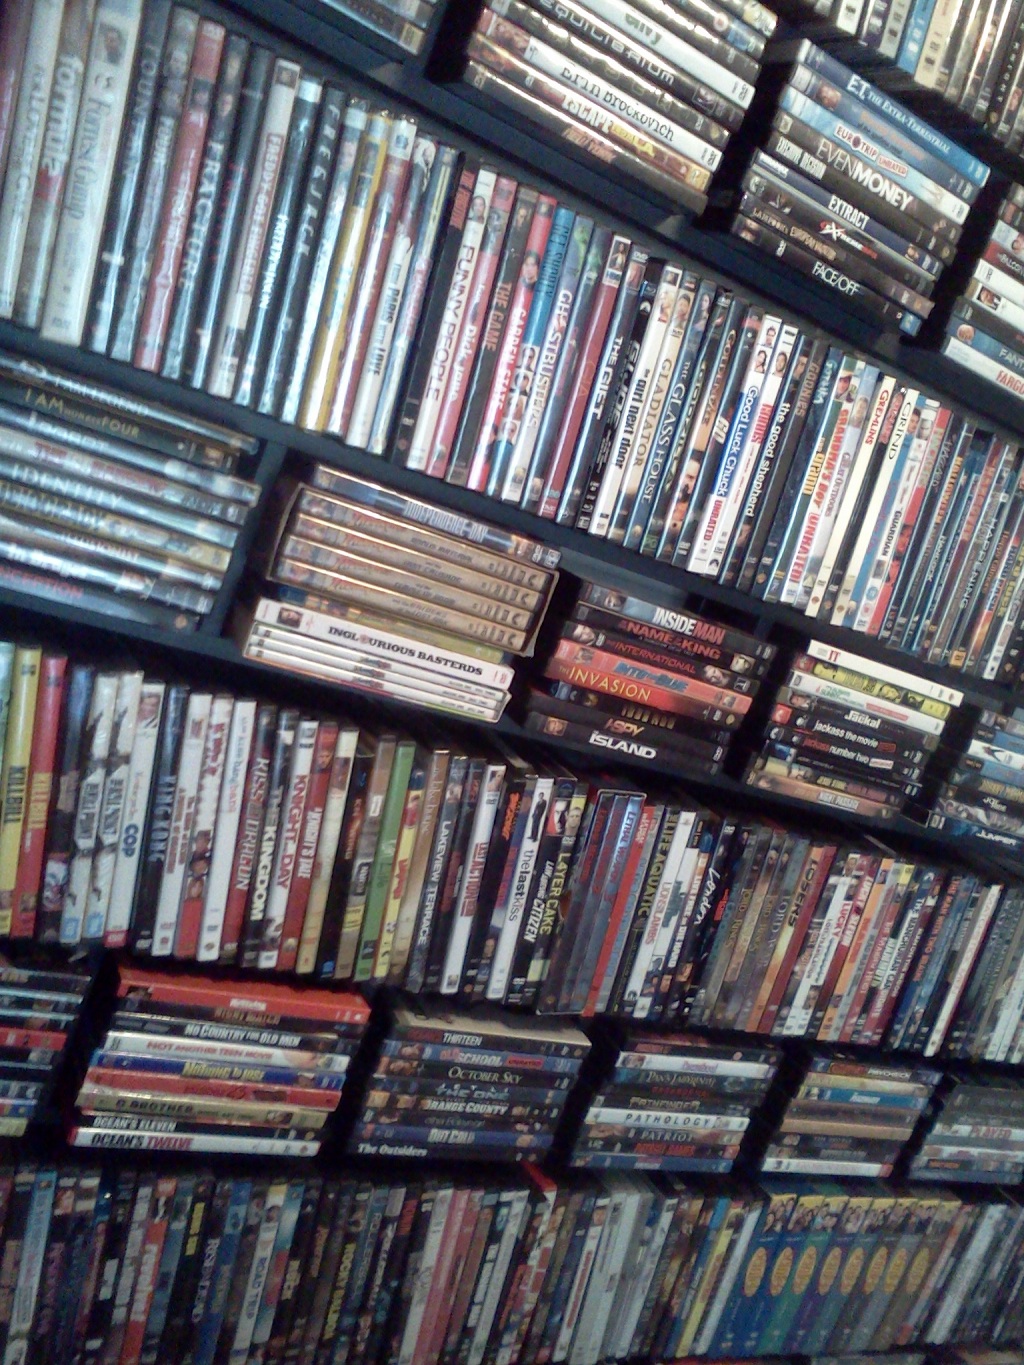 The Wall of Movies!